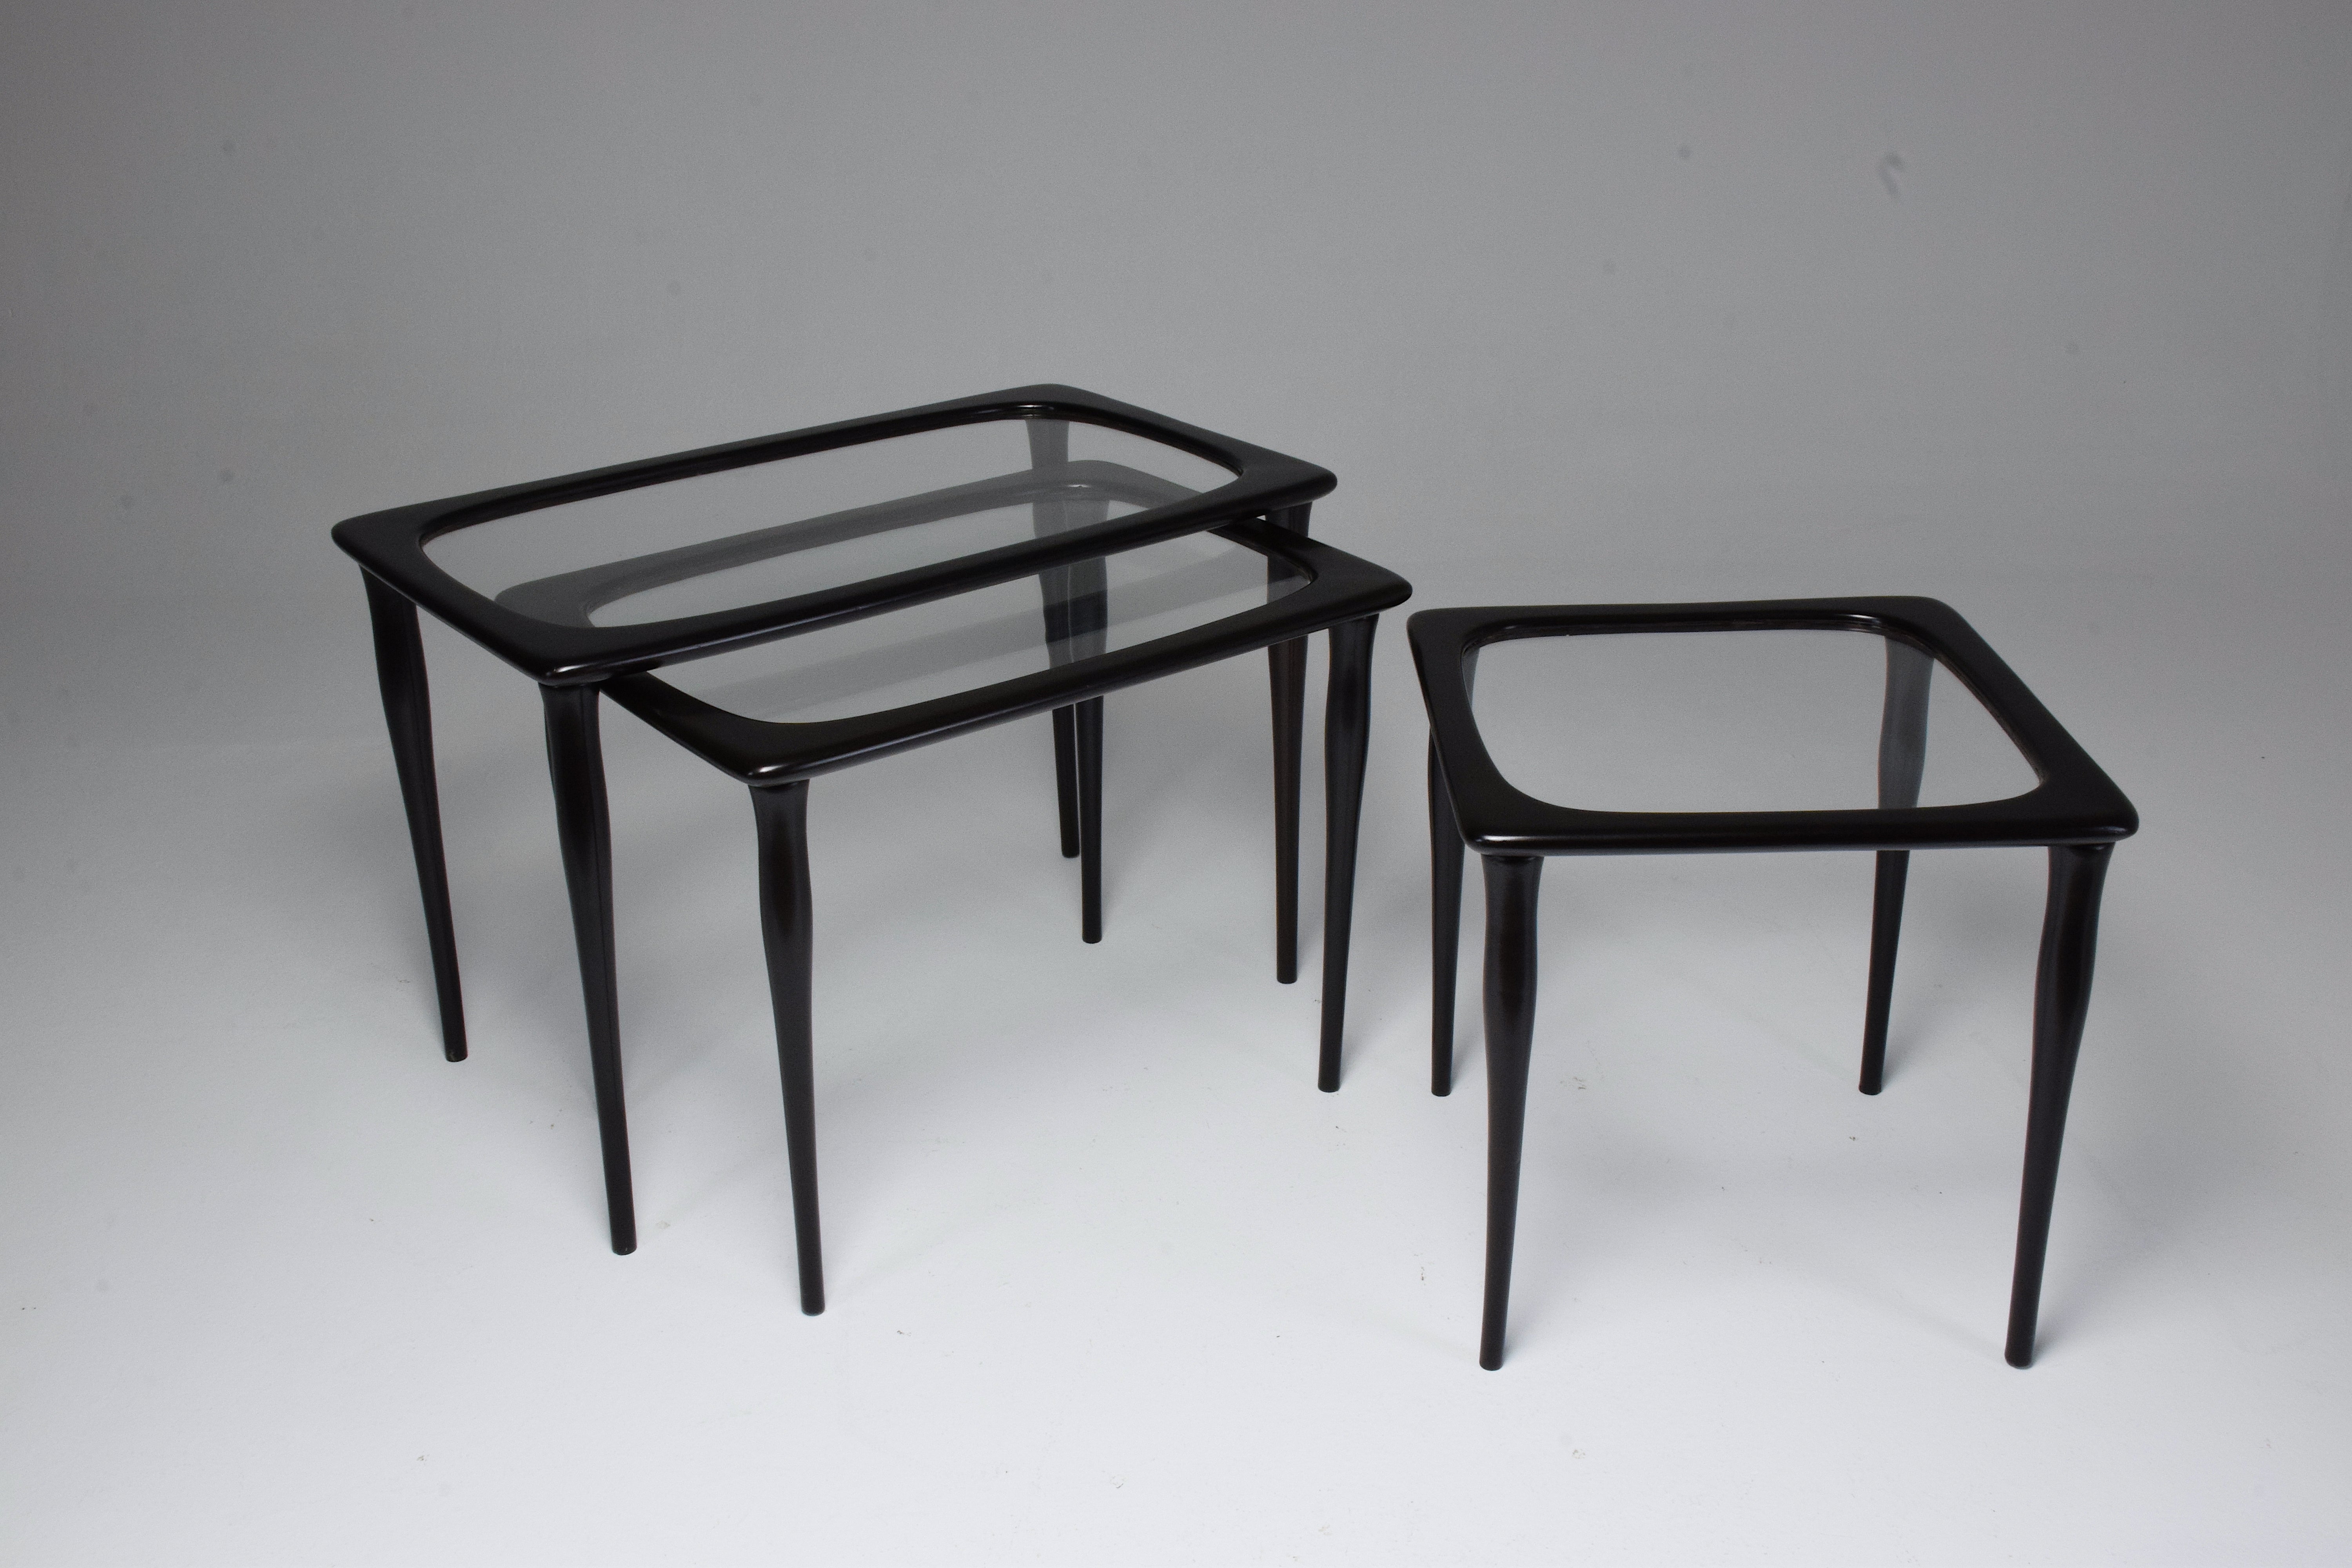 An exquisite set of three vintage nesting side or coffee tables, crafted by the renowned Italian furniture designer Ico Parisi in the 1950s. They are a testament to Parisi's visionary approach to furniture design, characterized by sleek lines and